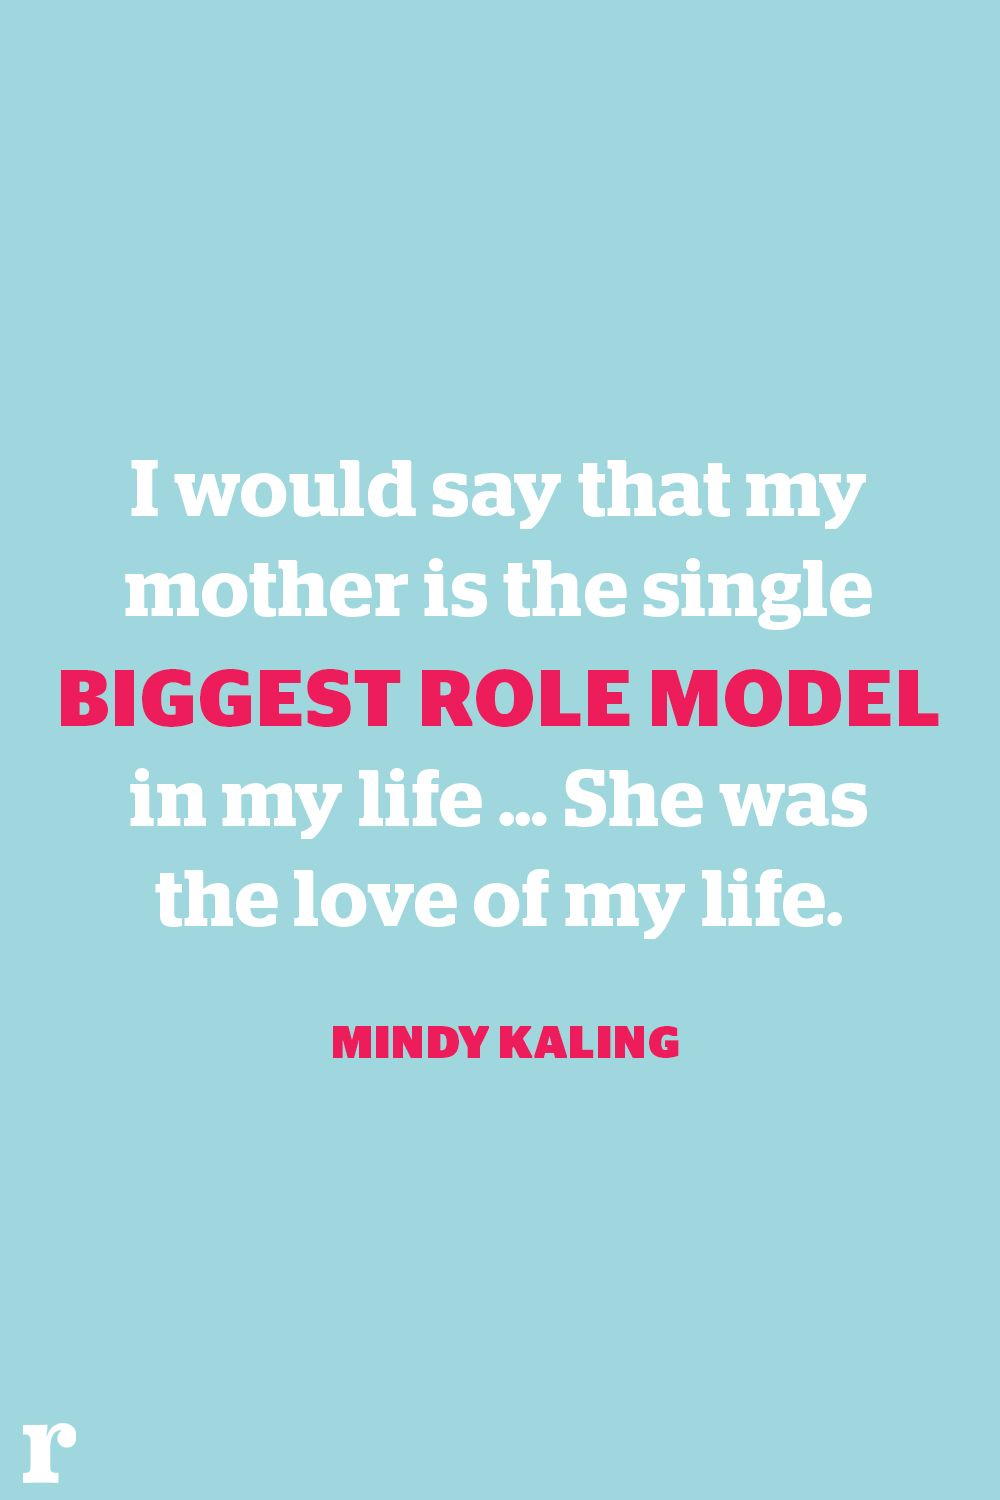 i would say that my mother is the single biggest role model in my life, she was the loe of my life. mindy kaling